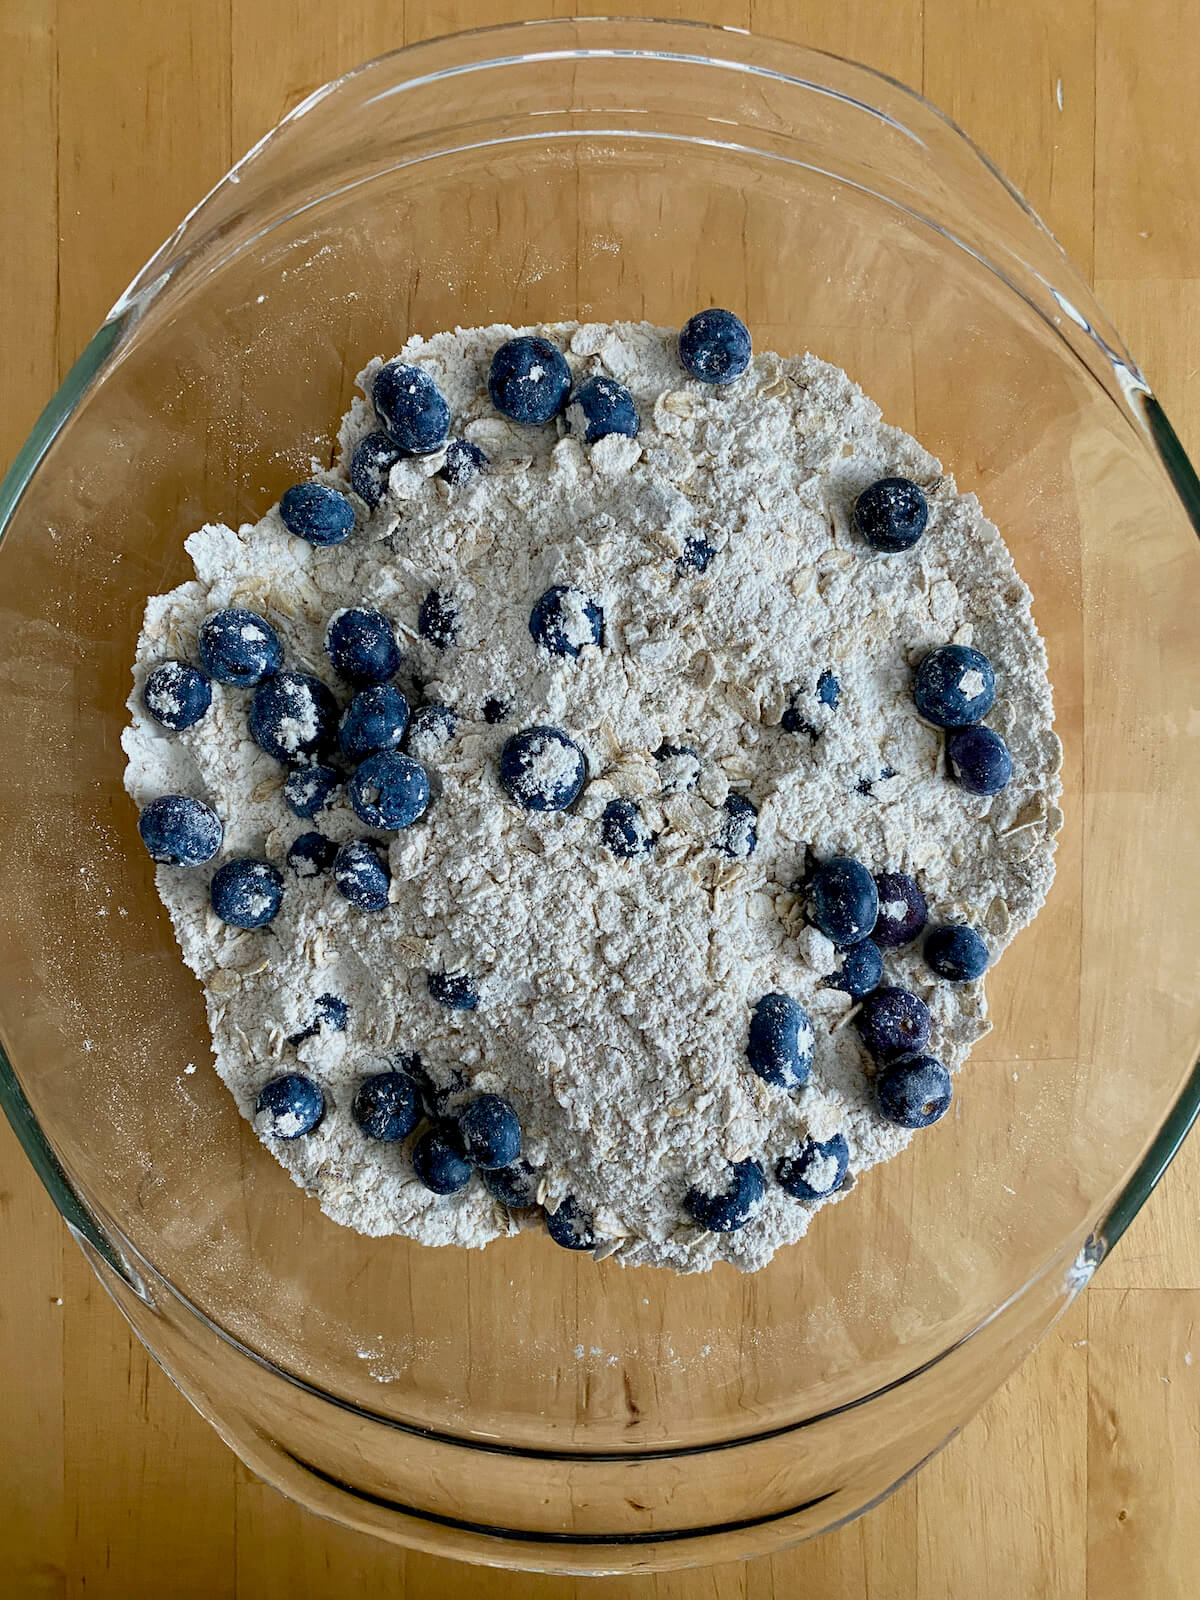 The dry ingredients and fresh blueberries mixed together in a large glass mixing bowl.